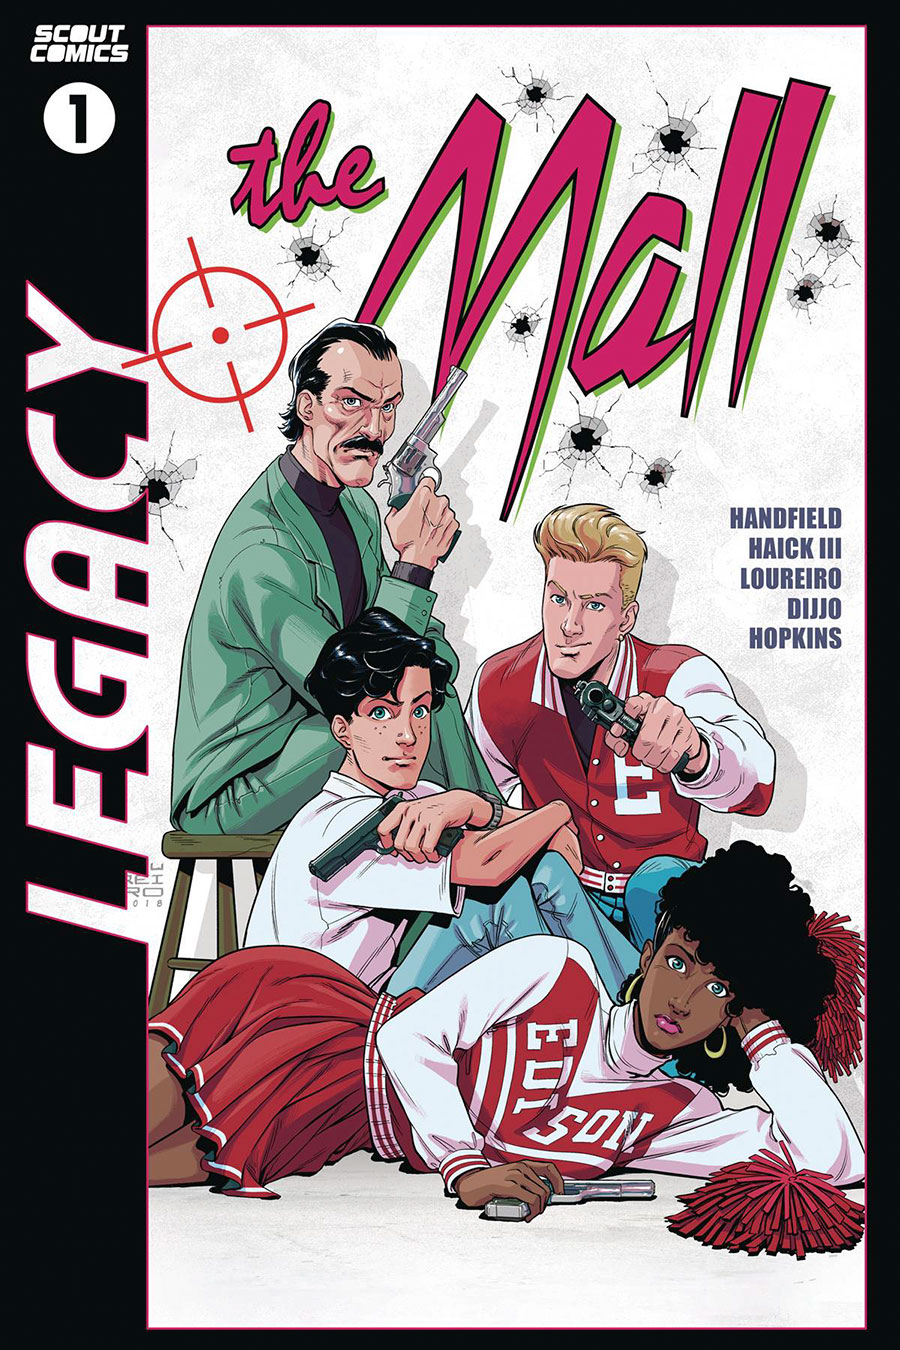 Mall (Scout Comics) #1 Cover C Scout Legacy Edition